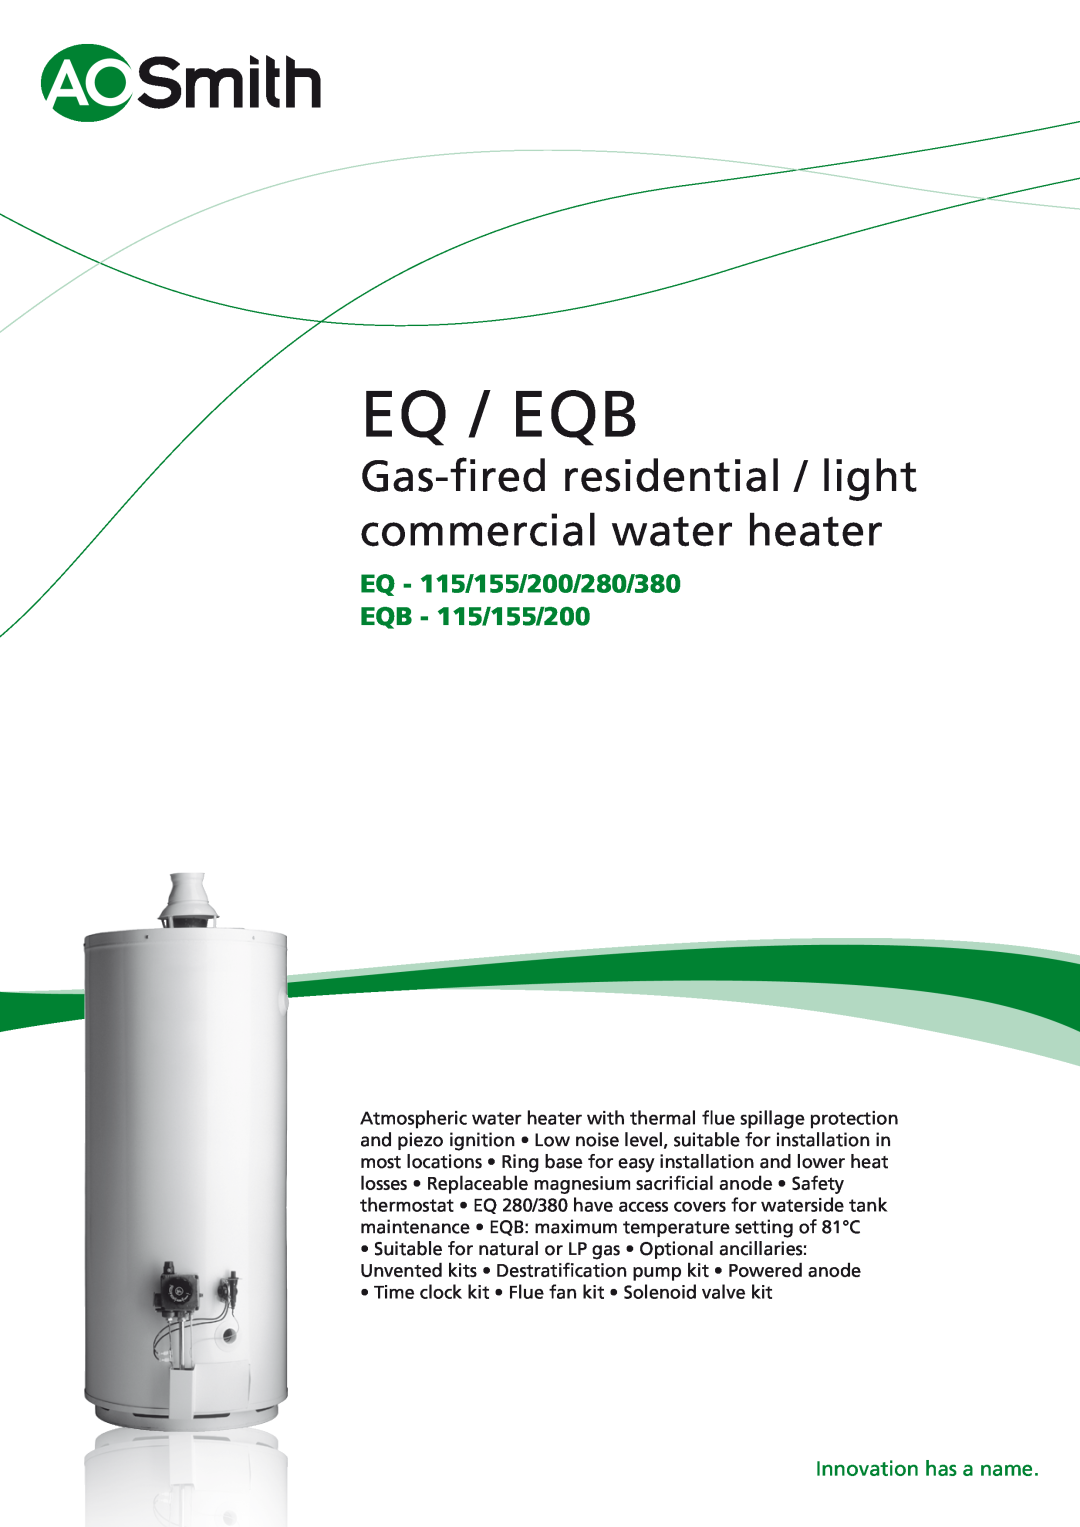 A.O. Smith EQ / EQB manual Eq / Eqb, Gas-fired residential / light commercial water heater, Innovation has a name 